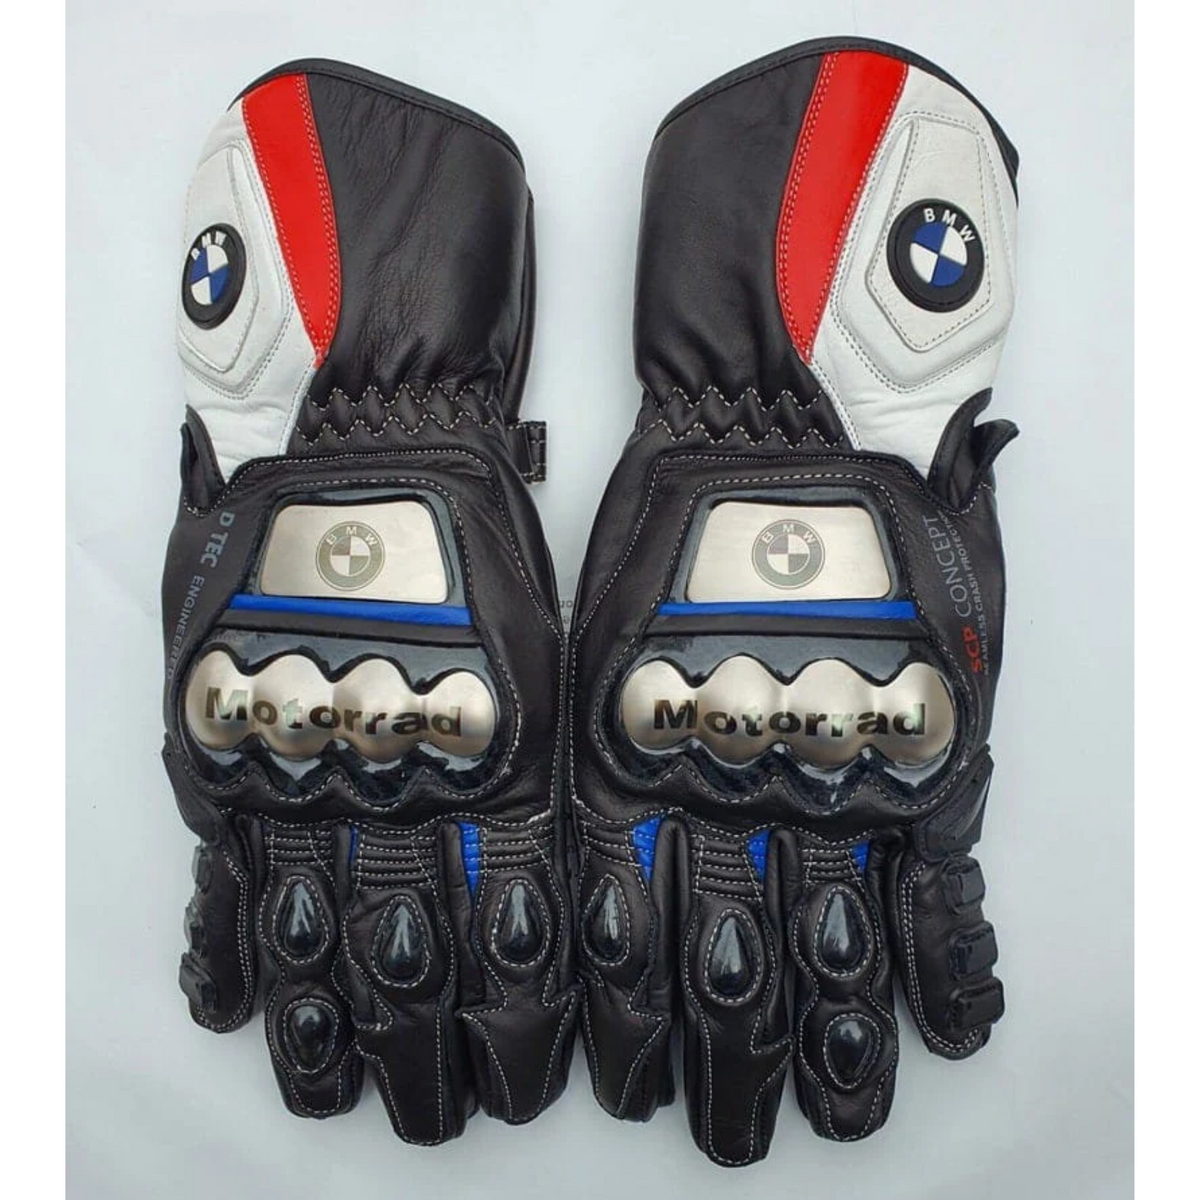 BMW Leather Gloves Luxury Driving Gloves Premium Leather Gloves BMW Accessories Men's Leather Gloves Women's Leather Gloves Stylish Driving Gloves BMW Gear High-Quality Leather Gloves BMW Fashion Accessories